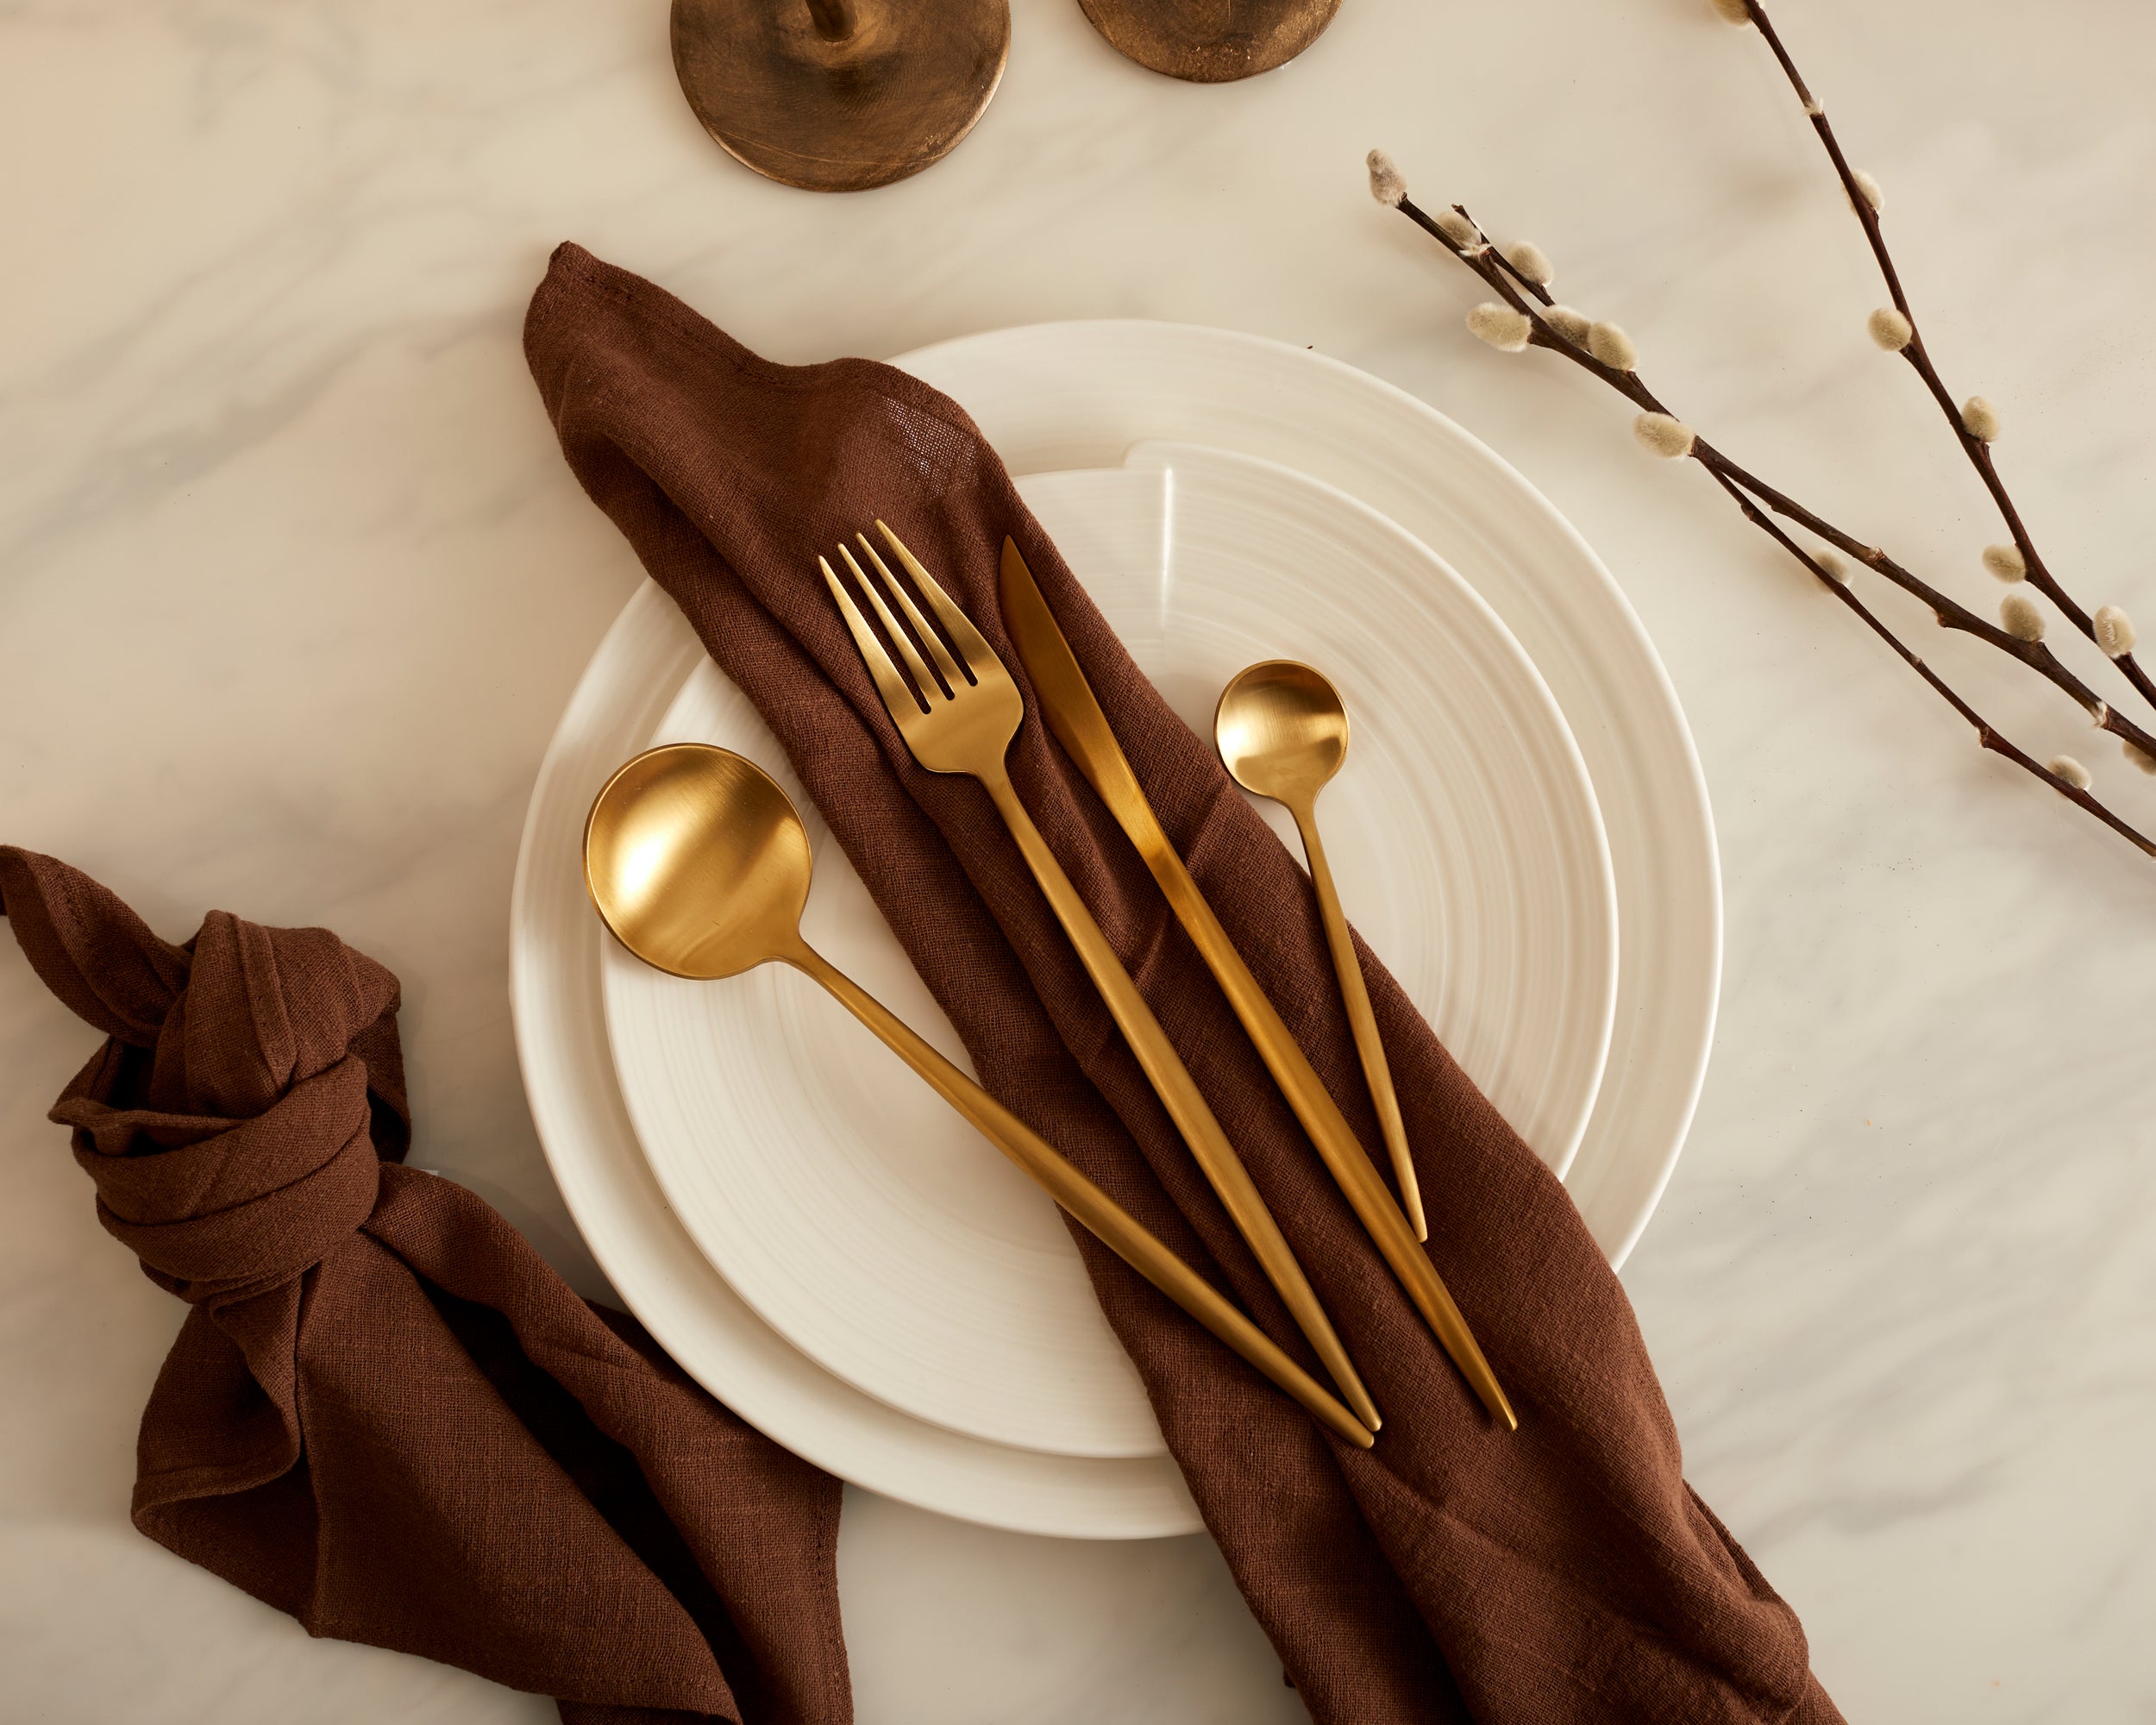 What a Host Home: Gold Cutlery Stainless Steel Set of Flatware